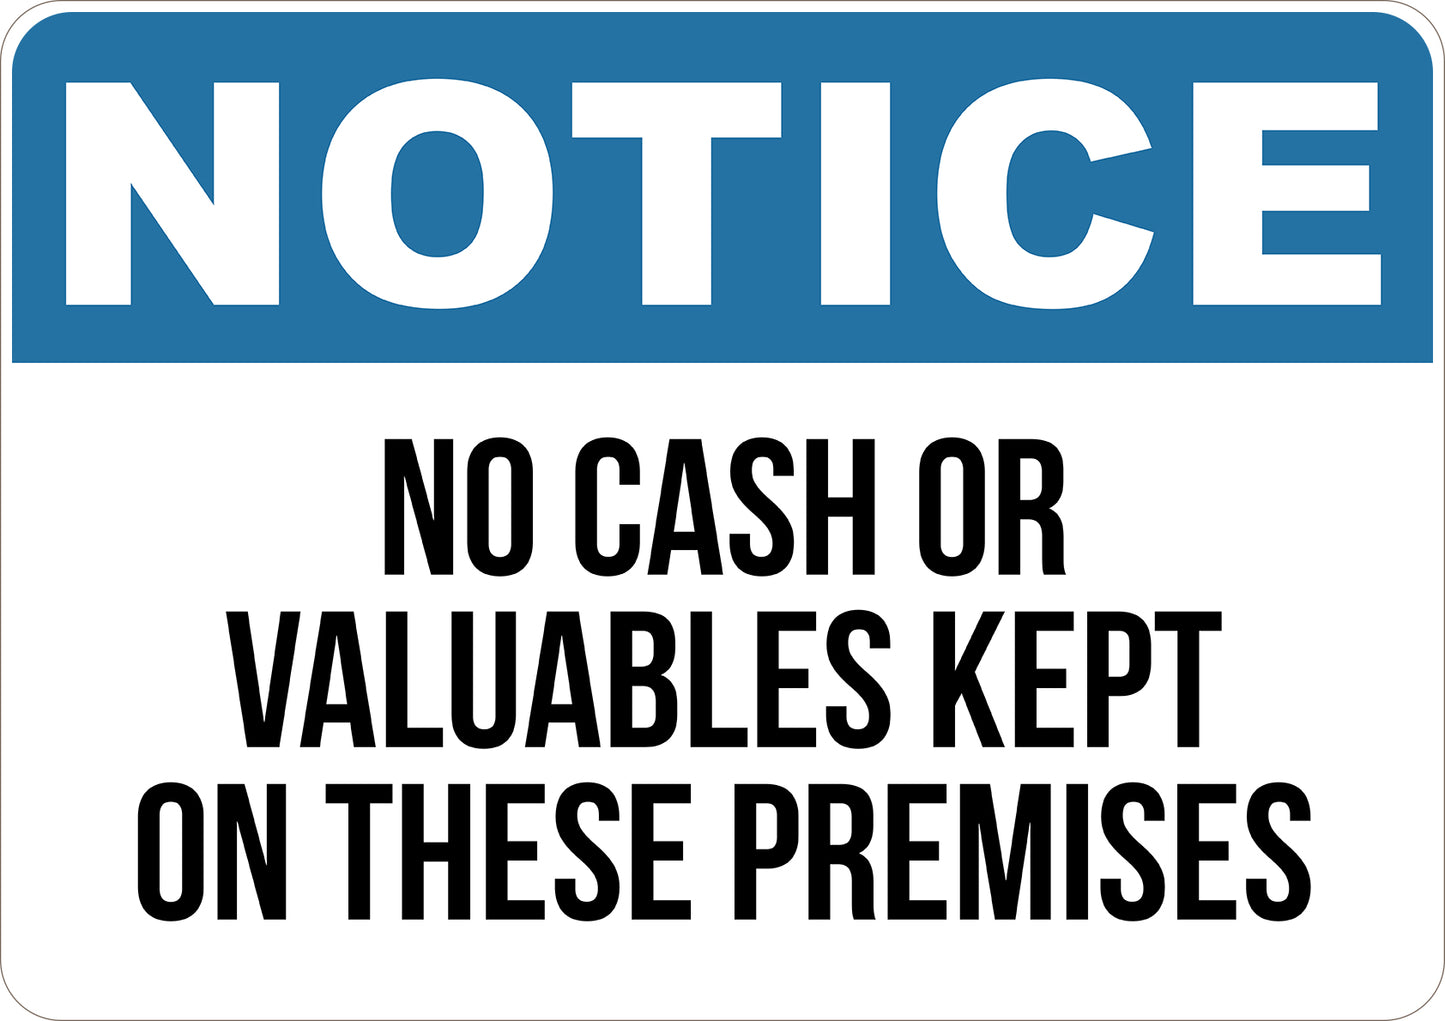 No Cash or Valuables Kept On These Premises Printed Sign